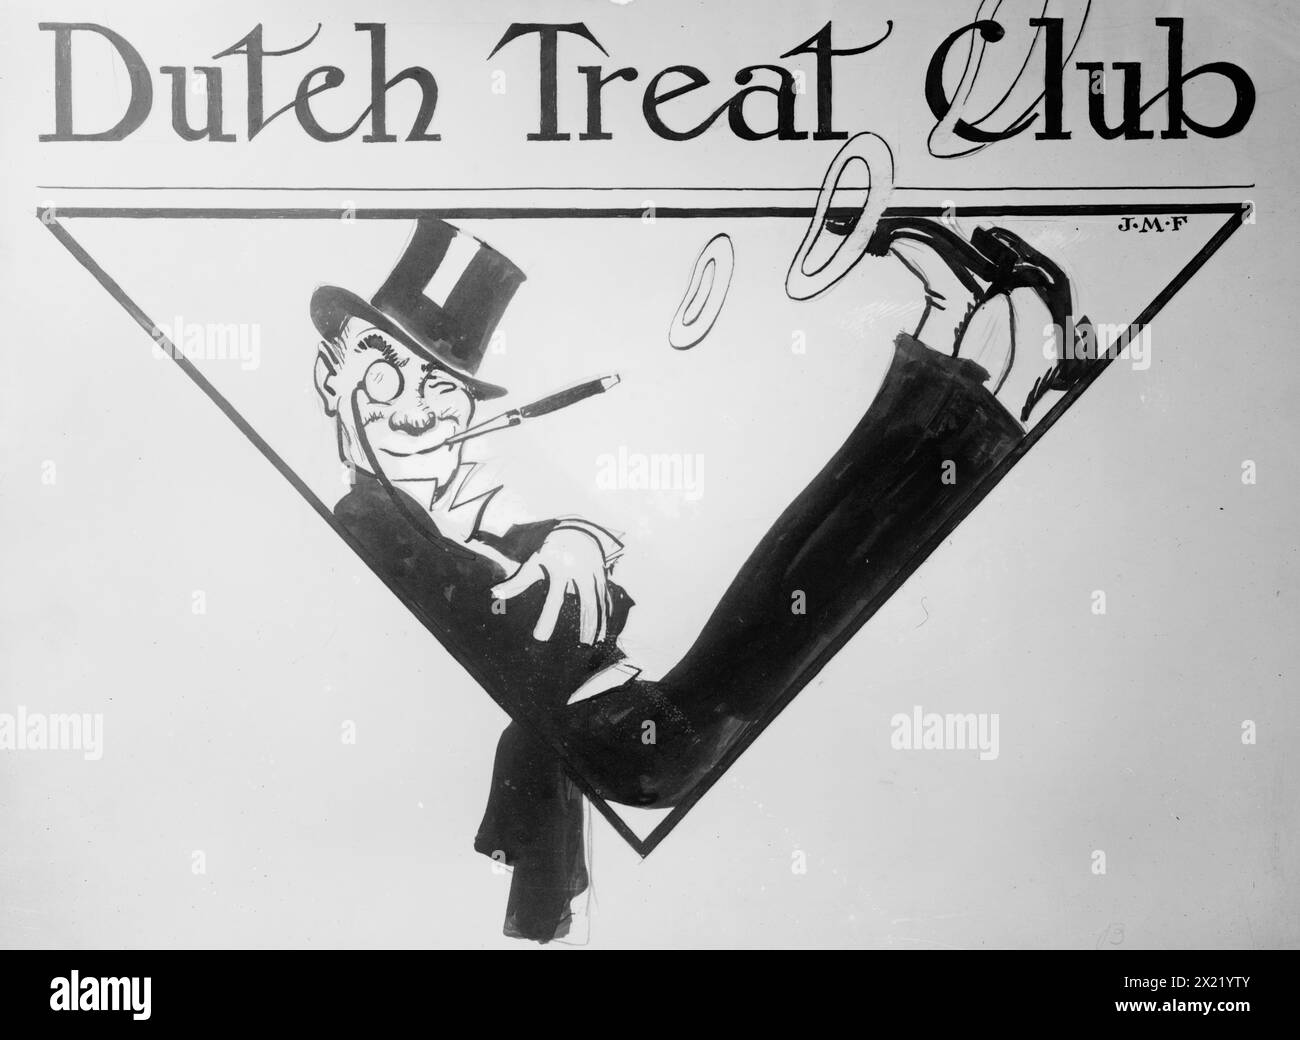 Dutch Treat Club - [cover drawing?], between c1910 and c1915. Shows an illustration by artist James Montgomery Flagg for the Dutch Treat Club, a society of illustrators, performers and writers in New York City. Stock Photo